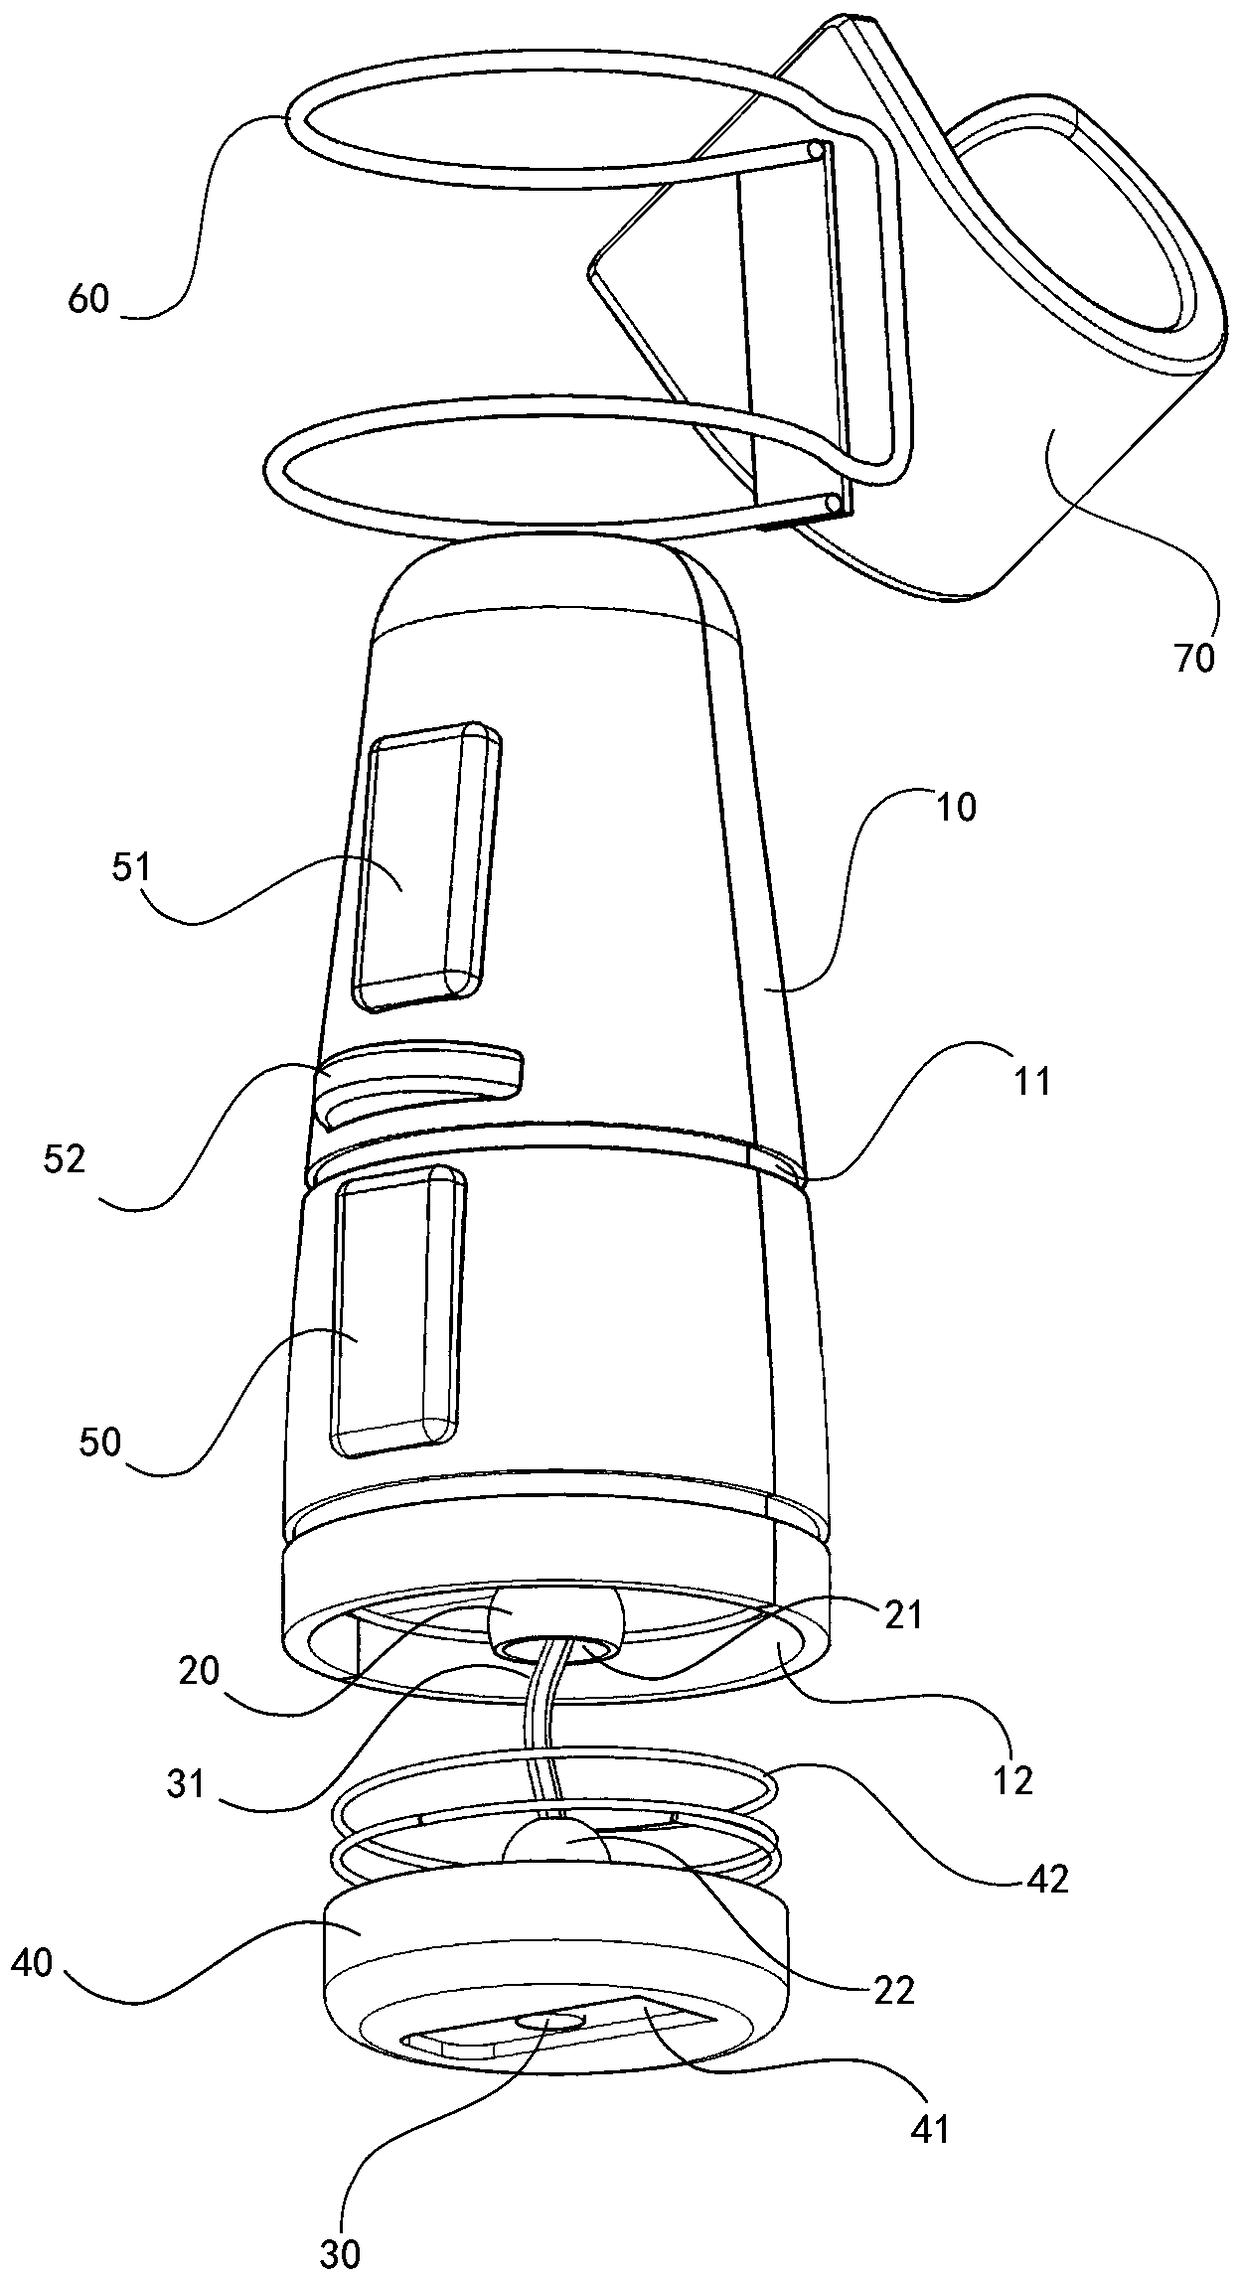 Universally adjustable ring-type mouse and method of use thereof